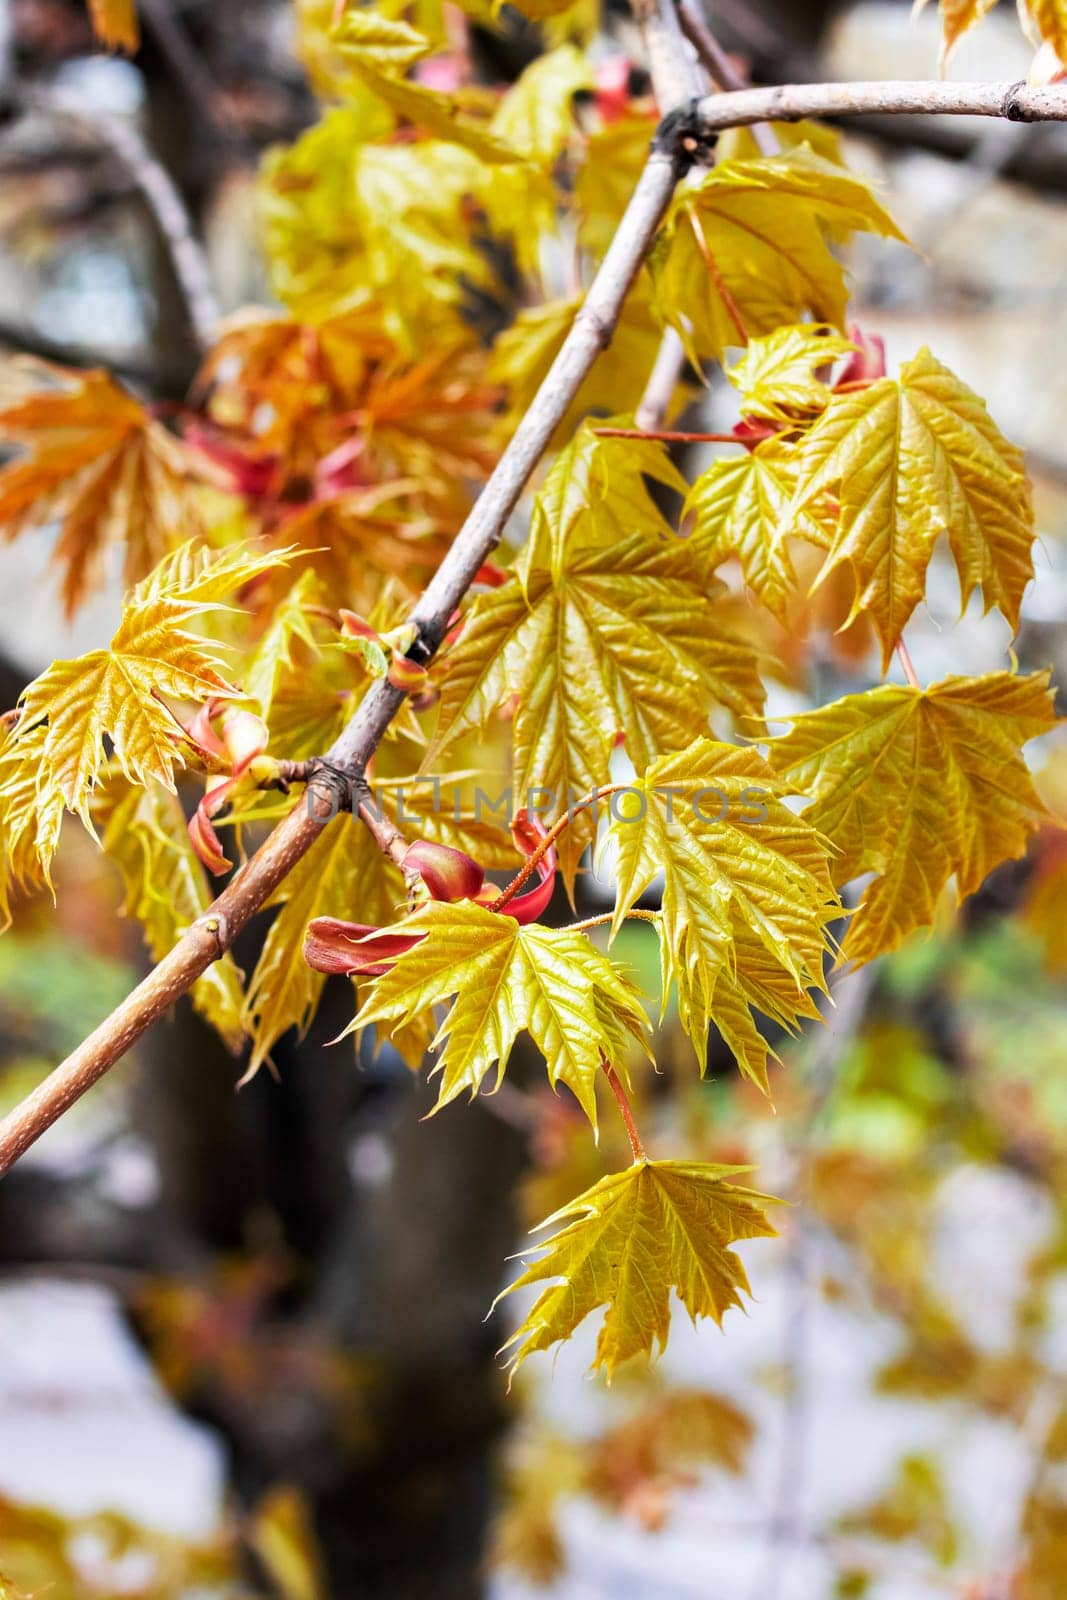 Small yellow leaves on a tree branch by Vera1703